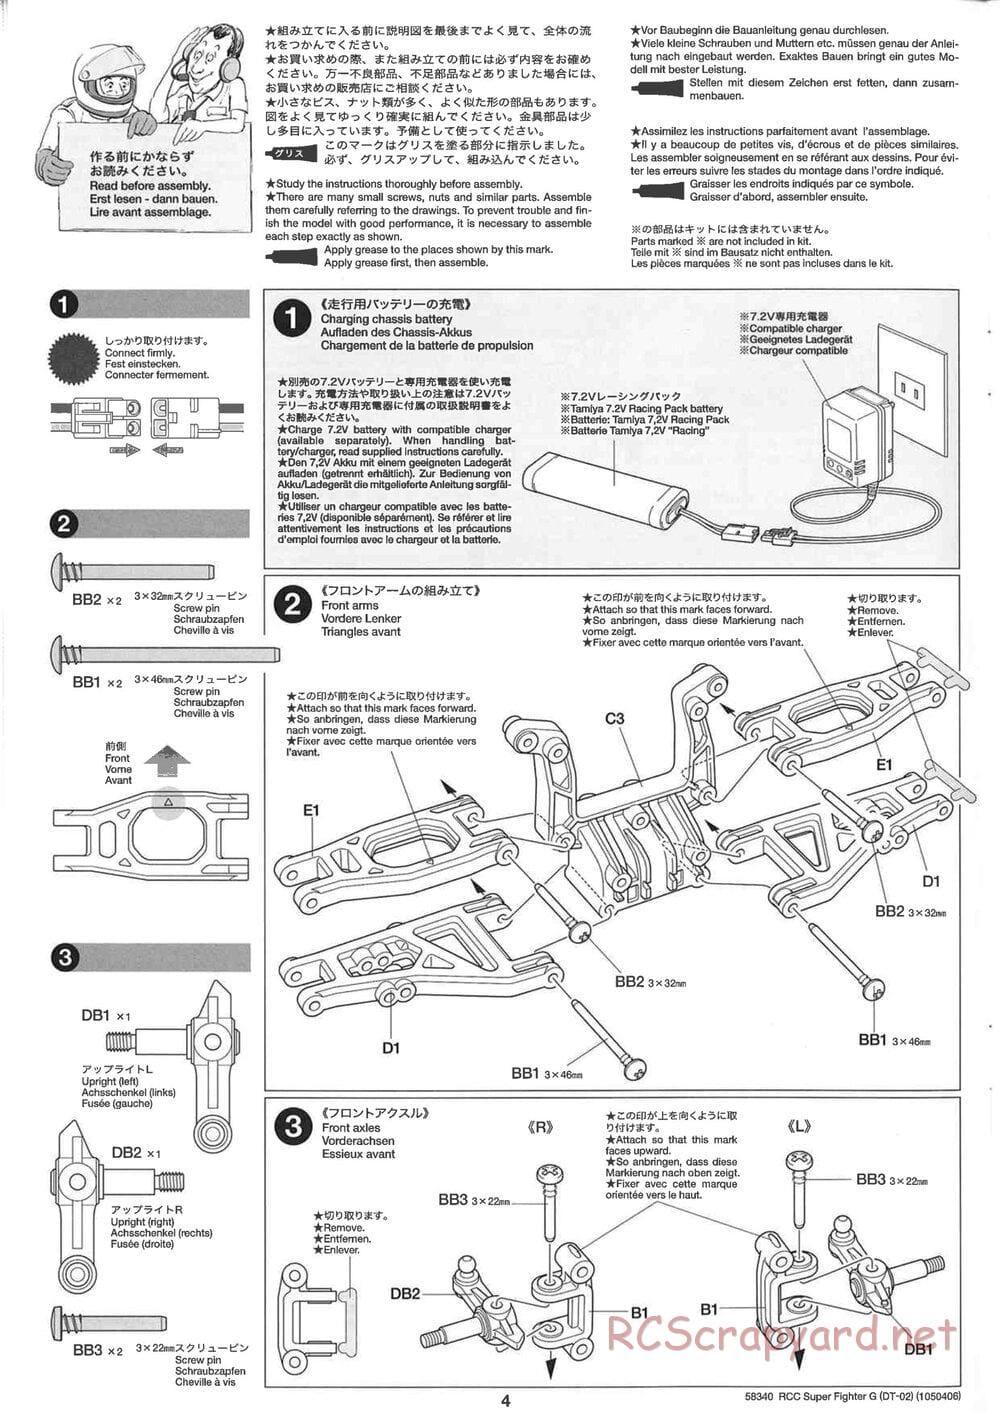 Tamiya - Super Fighter G Chassis - Manual - Page 4